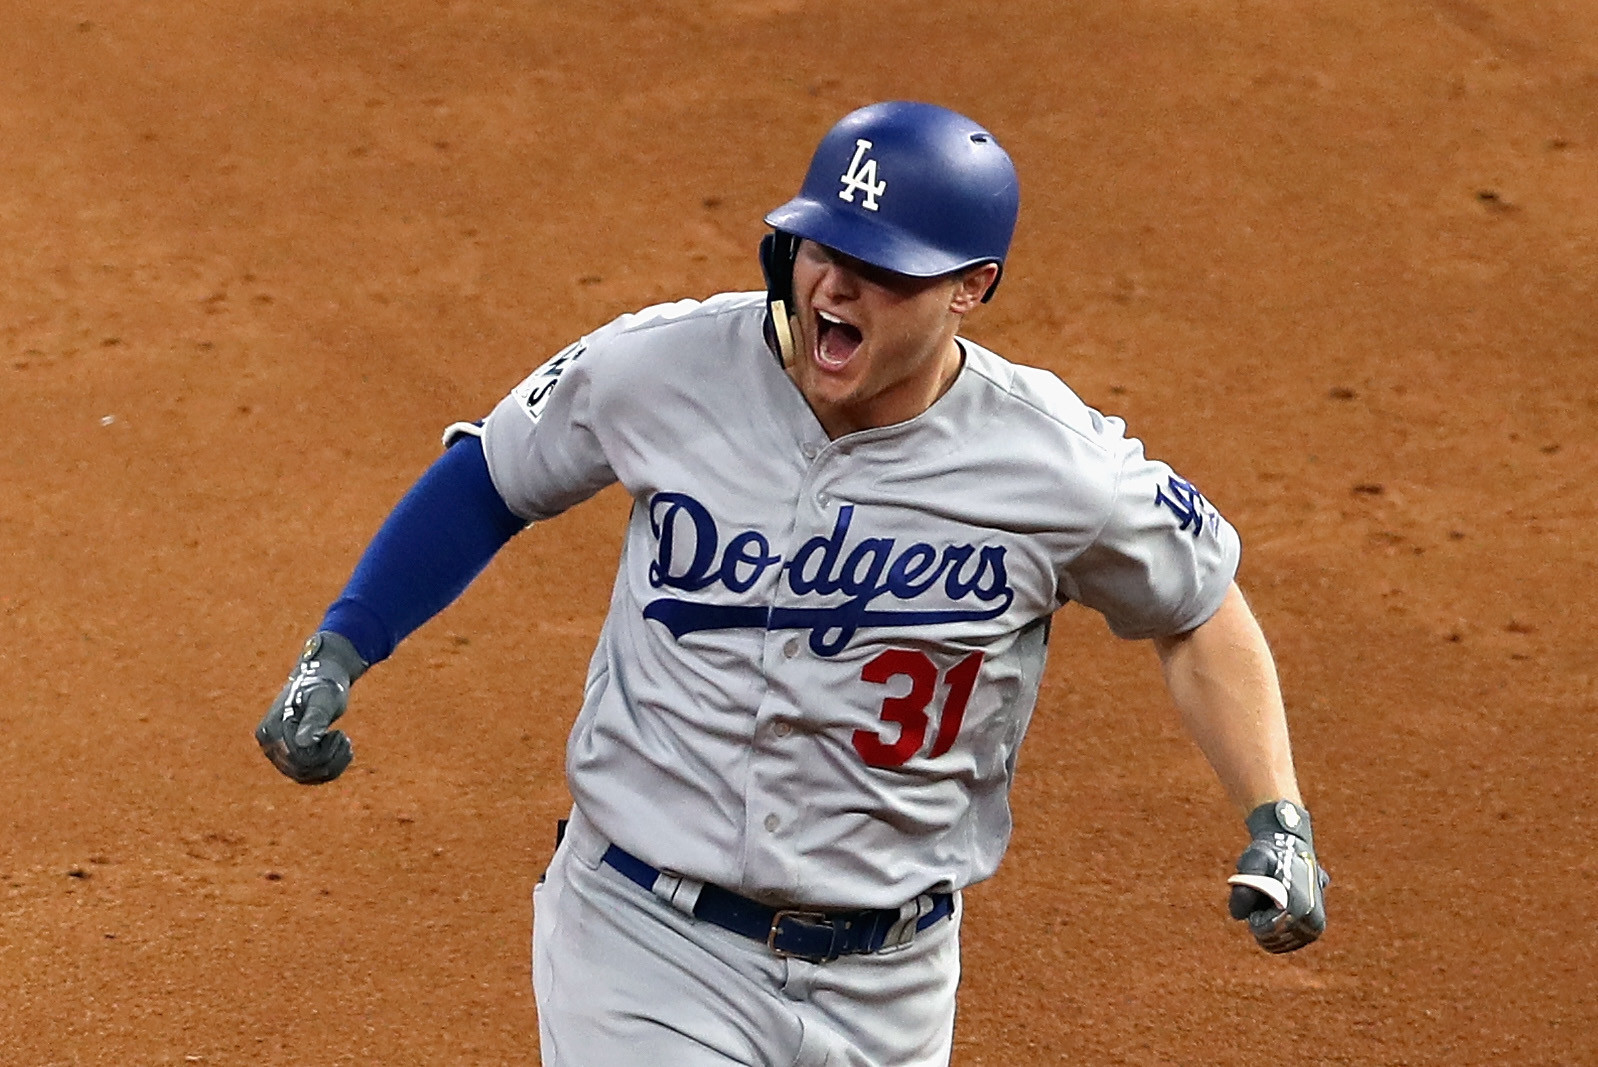 Dodgers Dugout: The rise, fall and rise again of Joc Pederson - LA Times